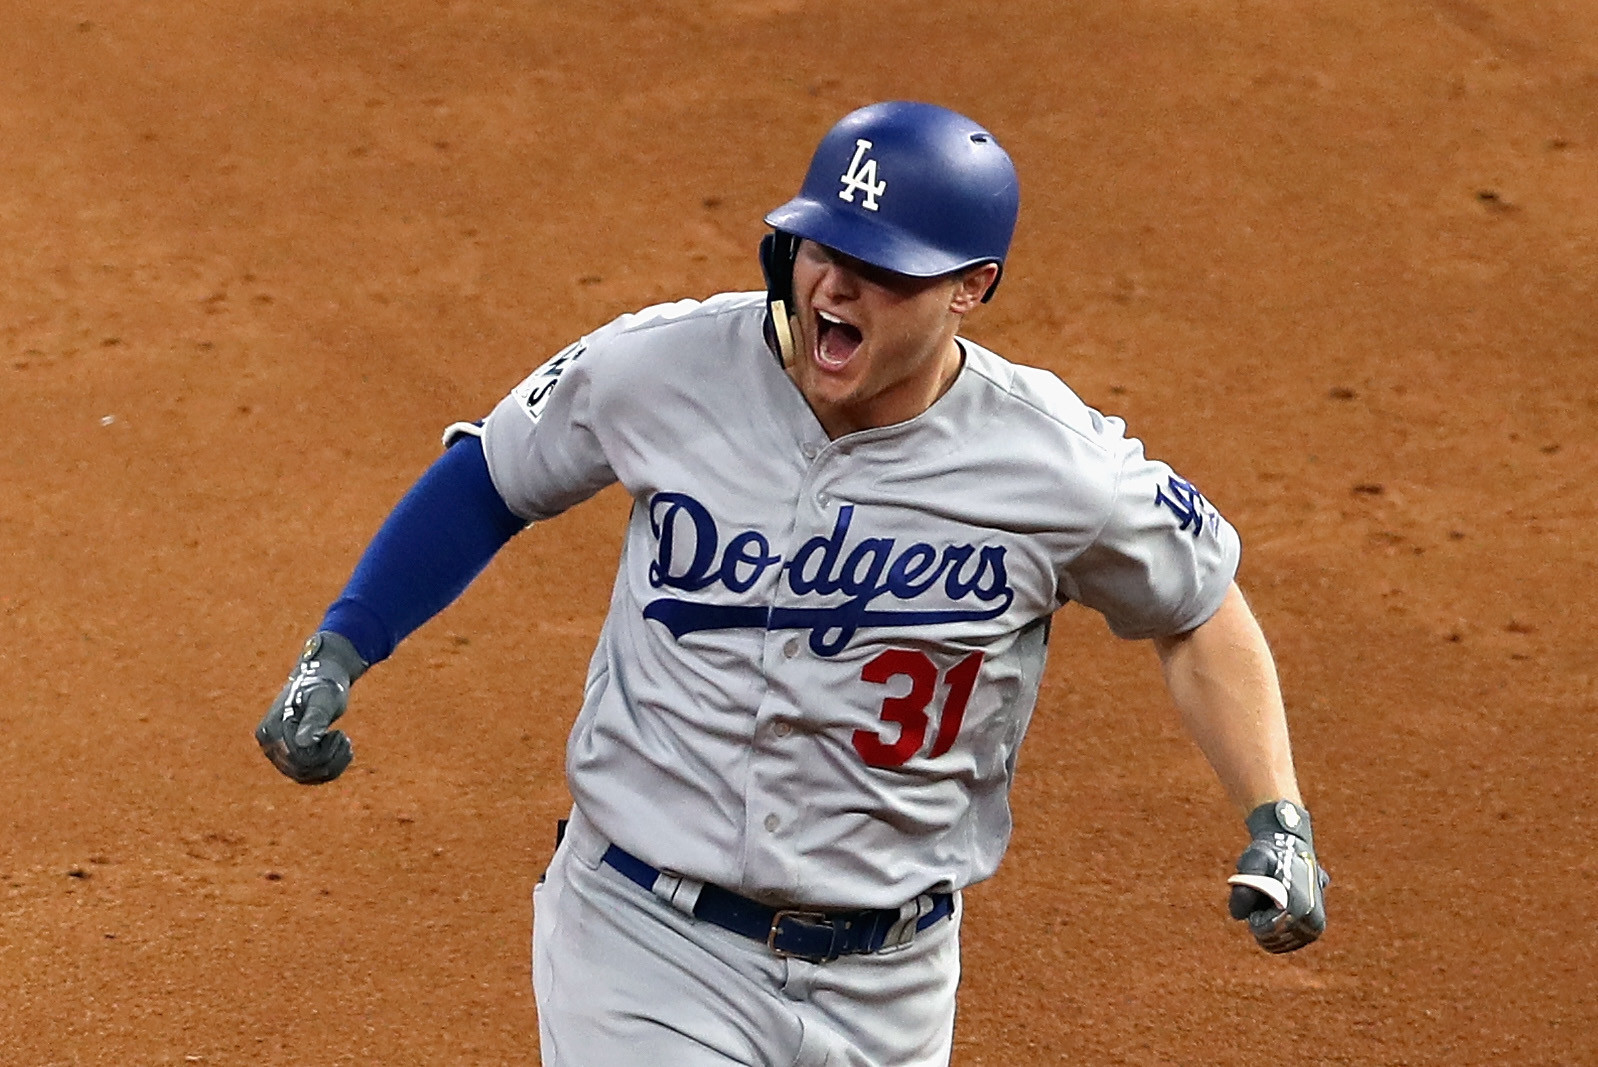 Dodgers Dugout: The rise, fall and rise again of Joc Pederson - LA Times